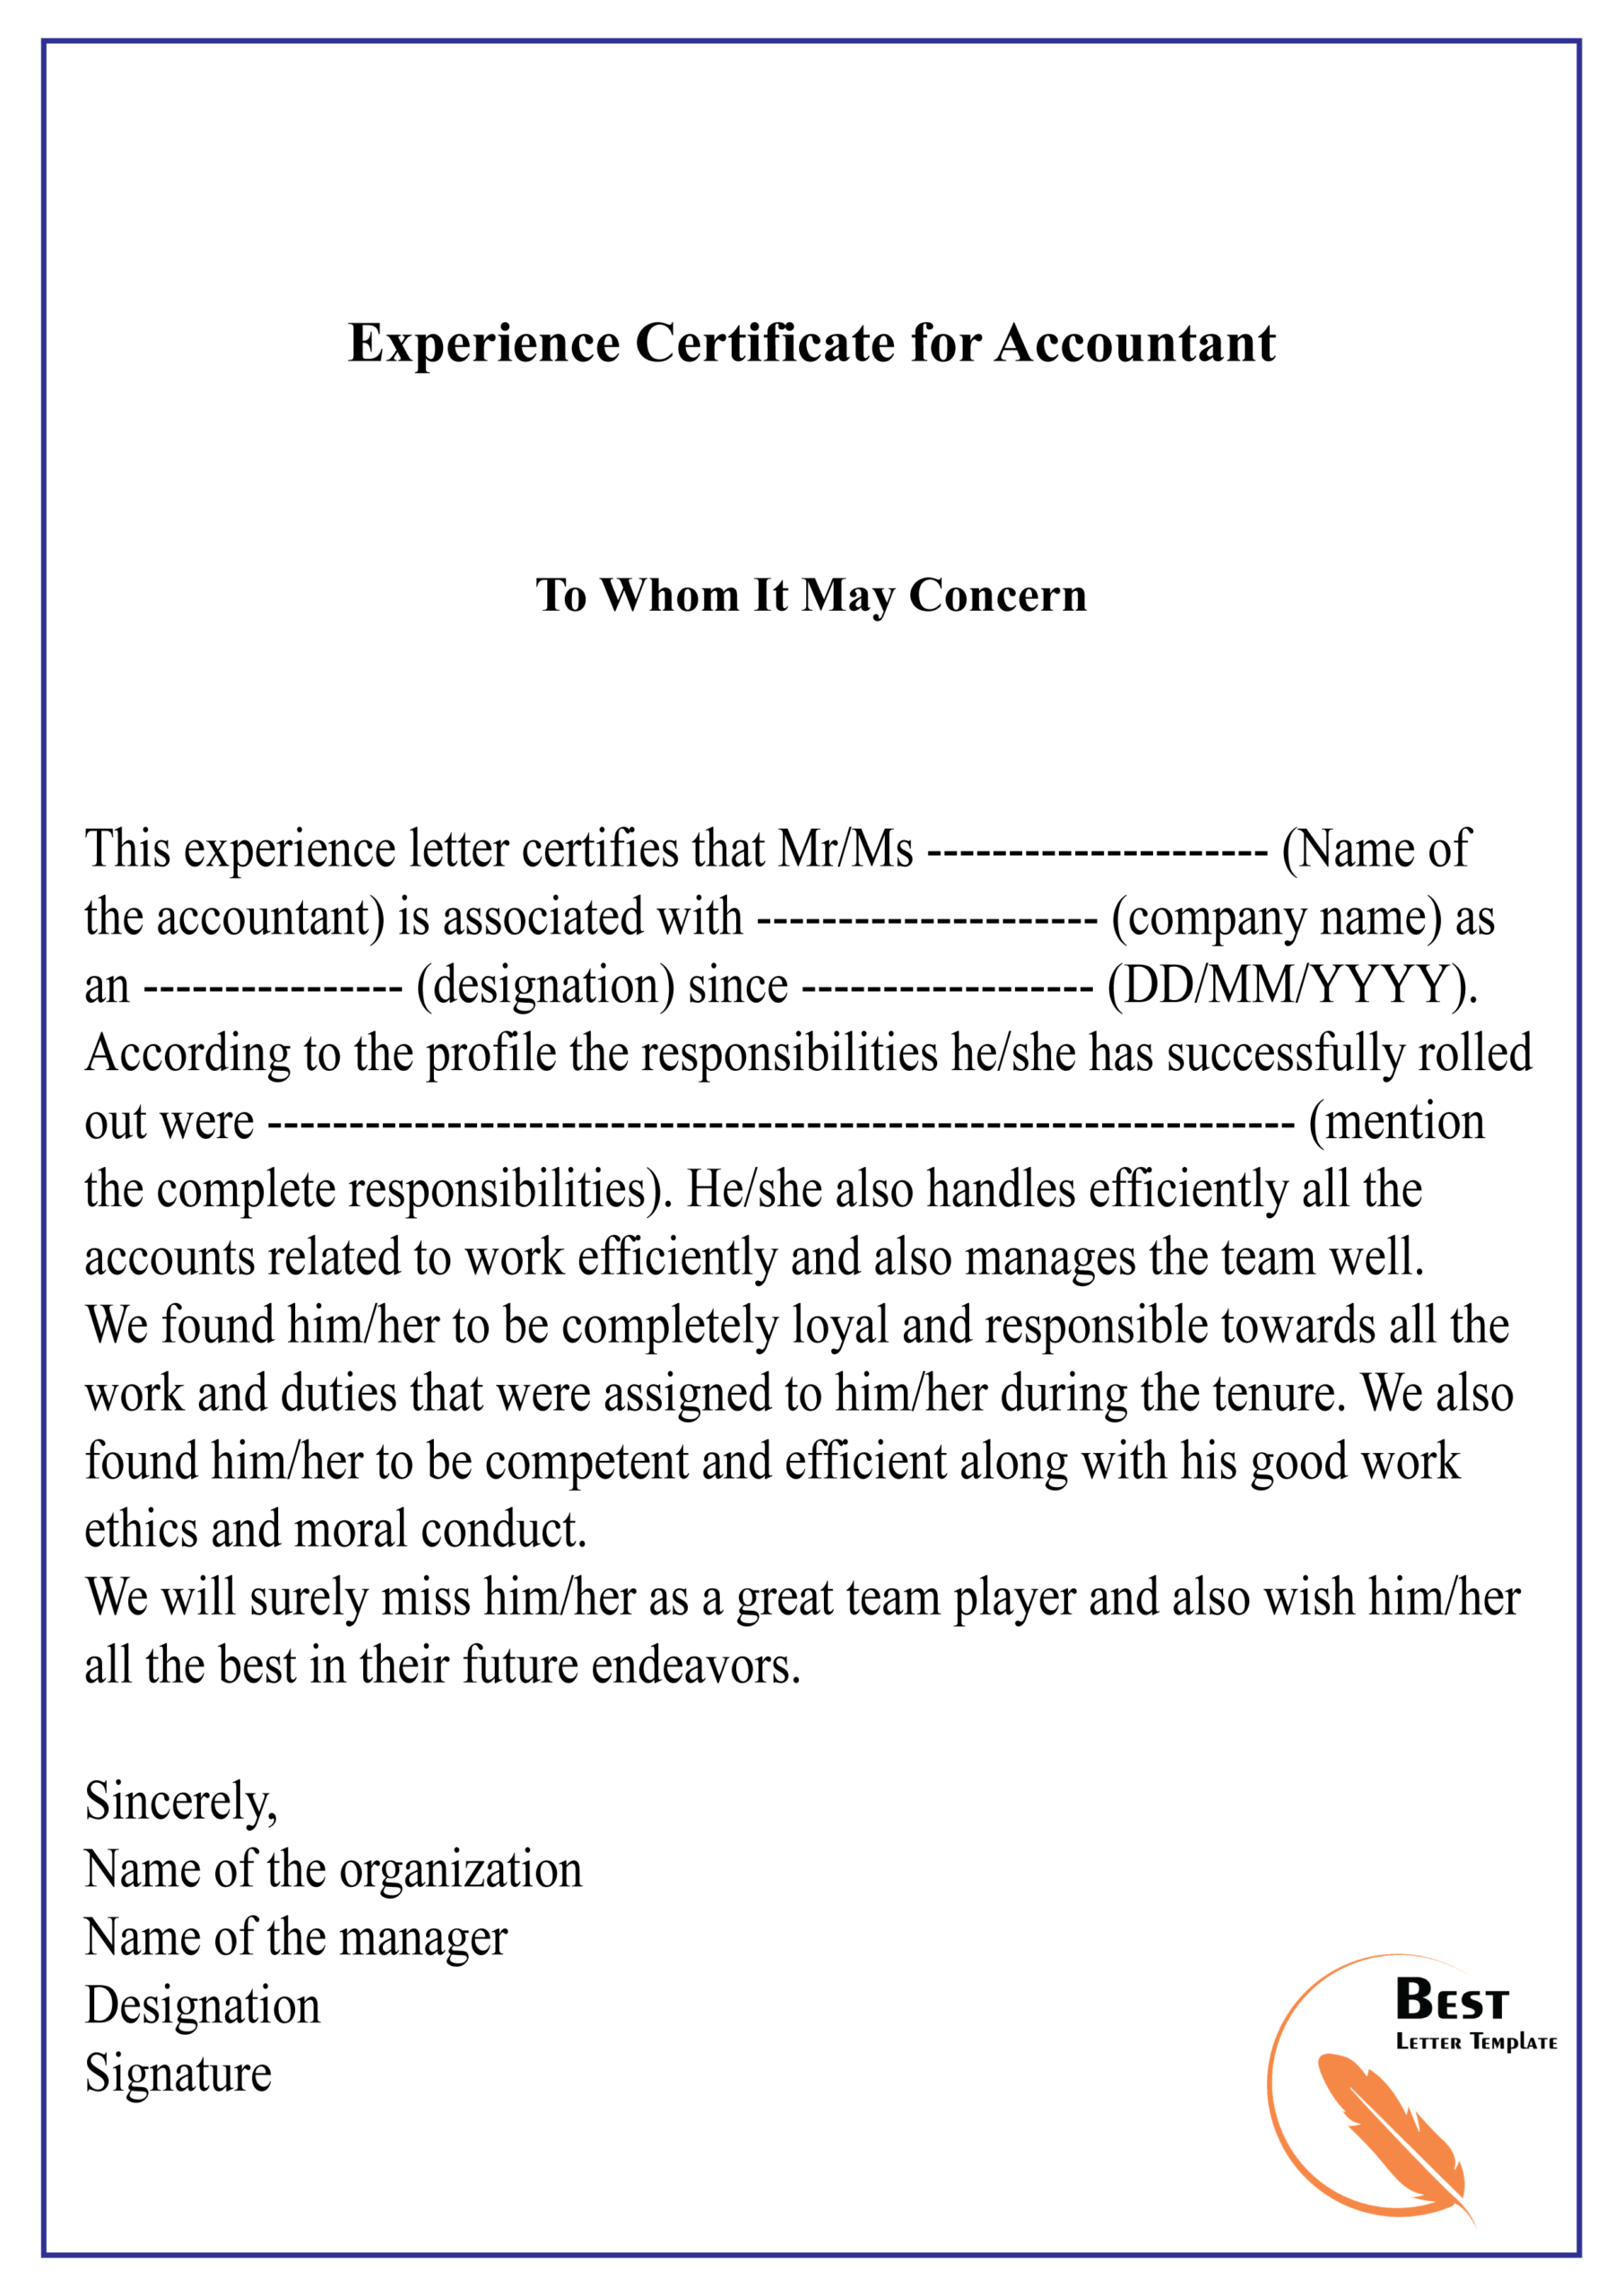 Experience Certificate For Accountant 01 | Best Letter Template For Template Of Experience Certificate